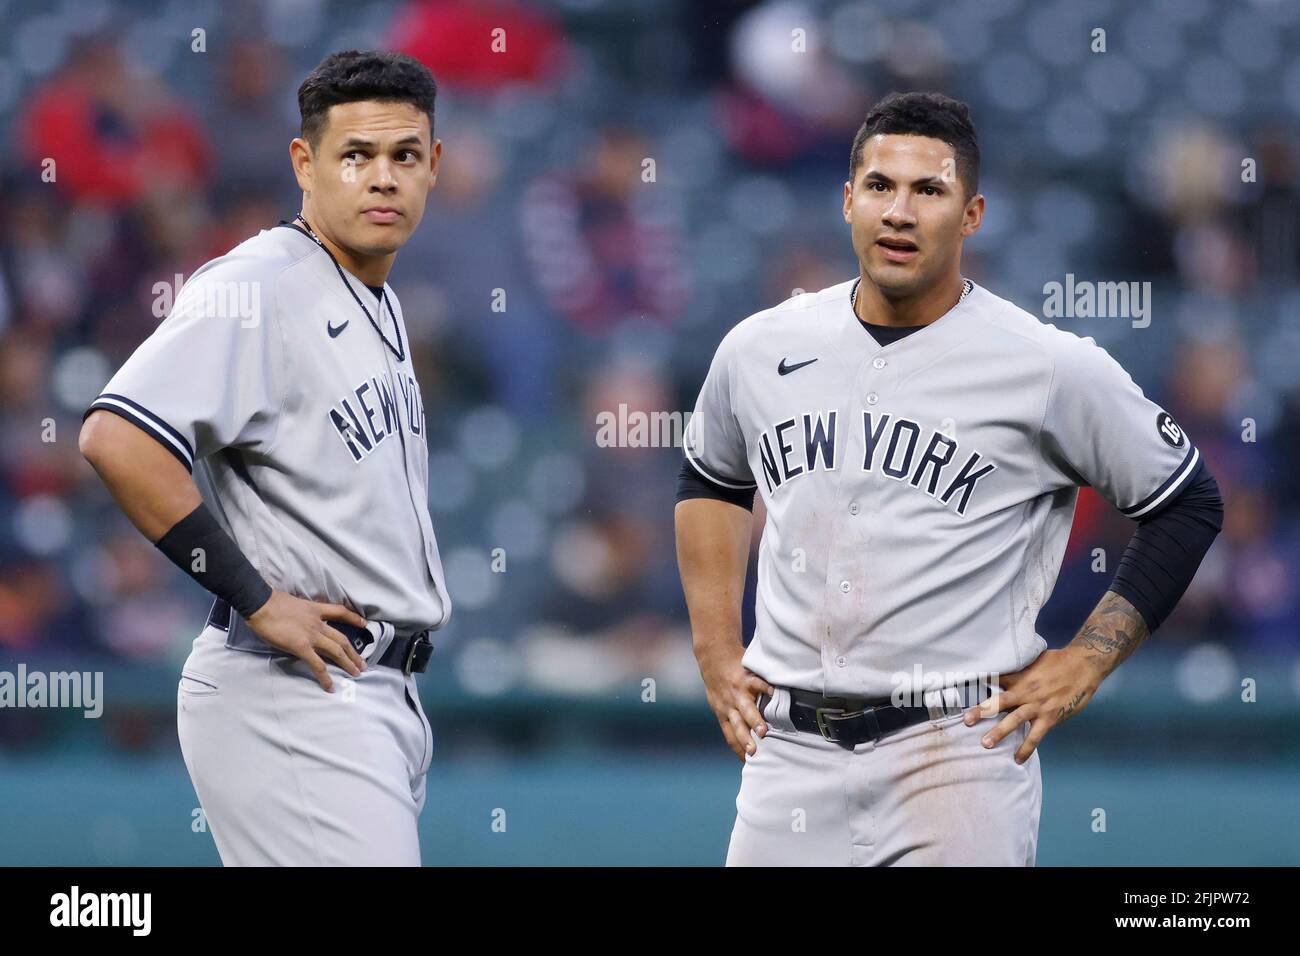 CLEVELAND, OH - APRIL 24: Gleyber Torres (25) and Gio Urshela (29) of the New  York Yankees look on during a game against the Cleveland Indians at Prog  Stock Photo - Alamy